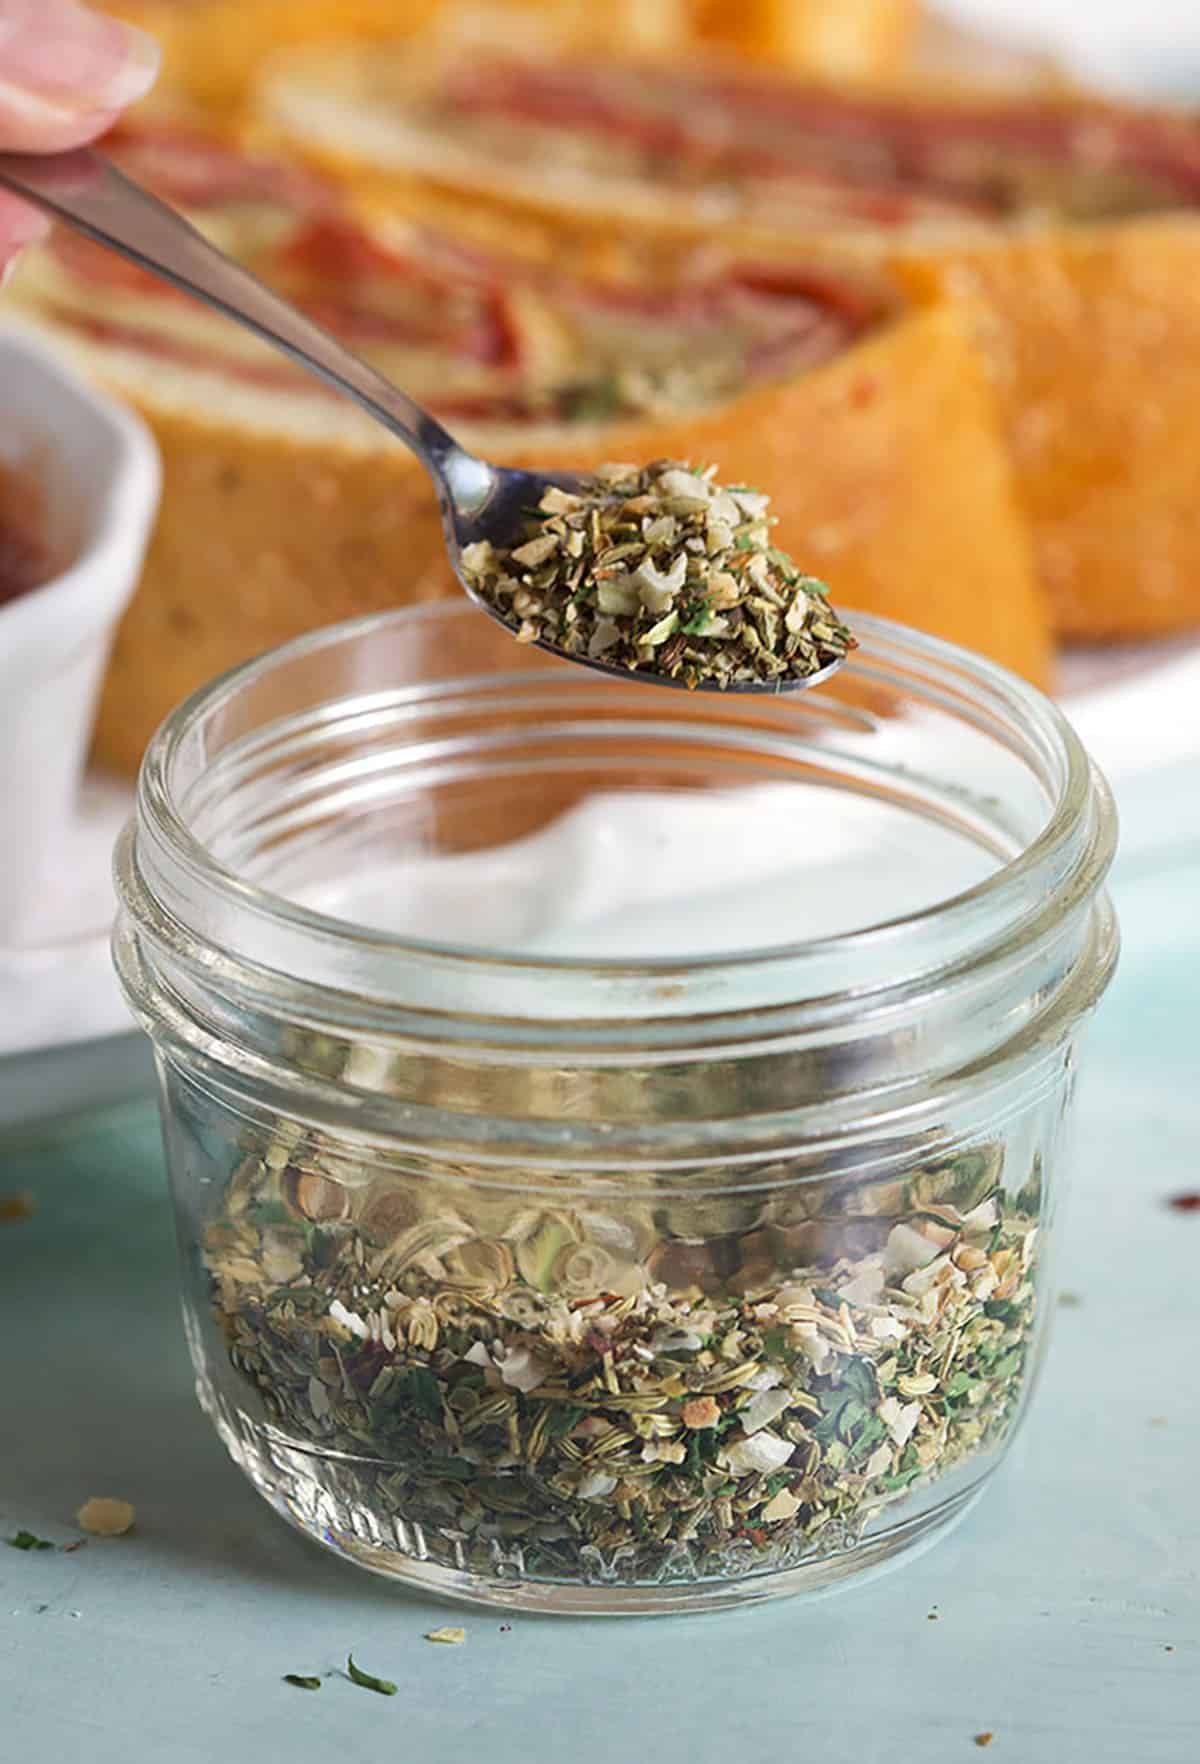 Jar with Pizza Seasoning and a spoon with a scoop of seasoning on it.